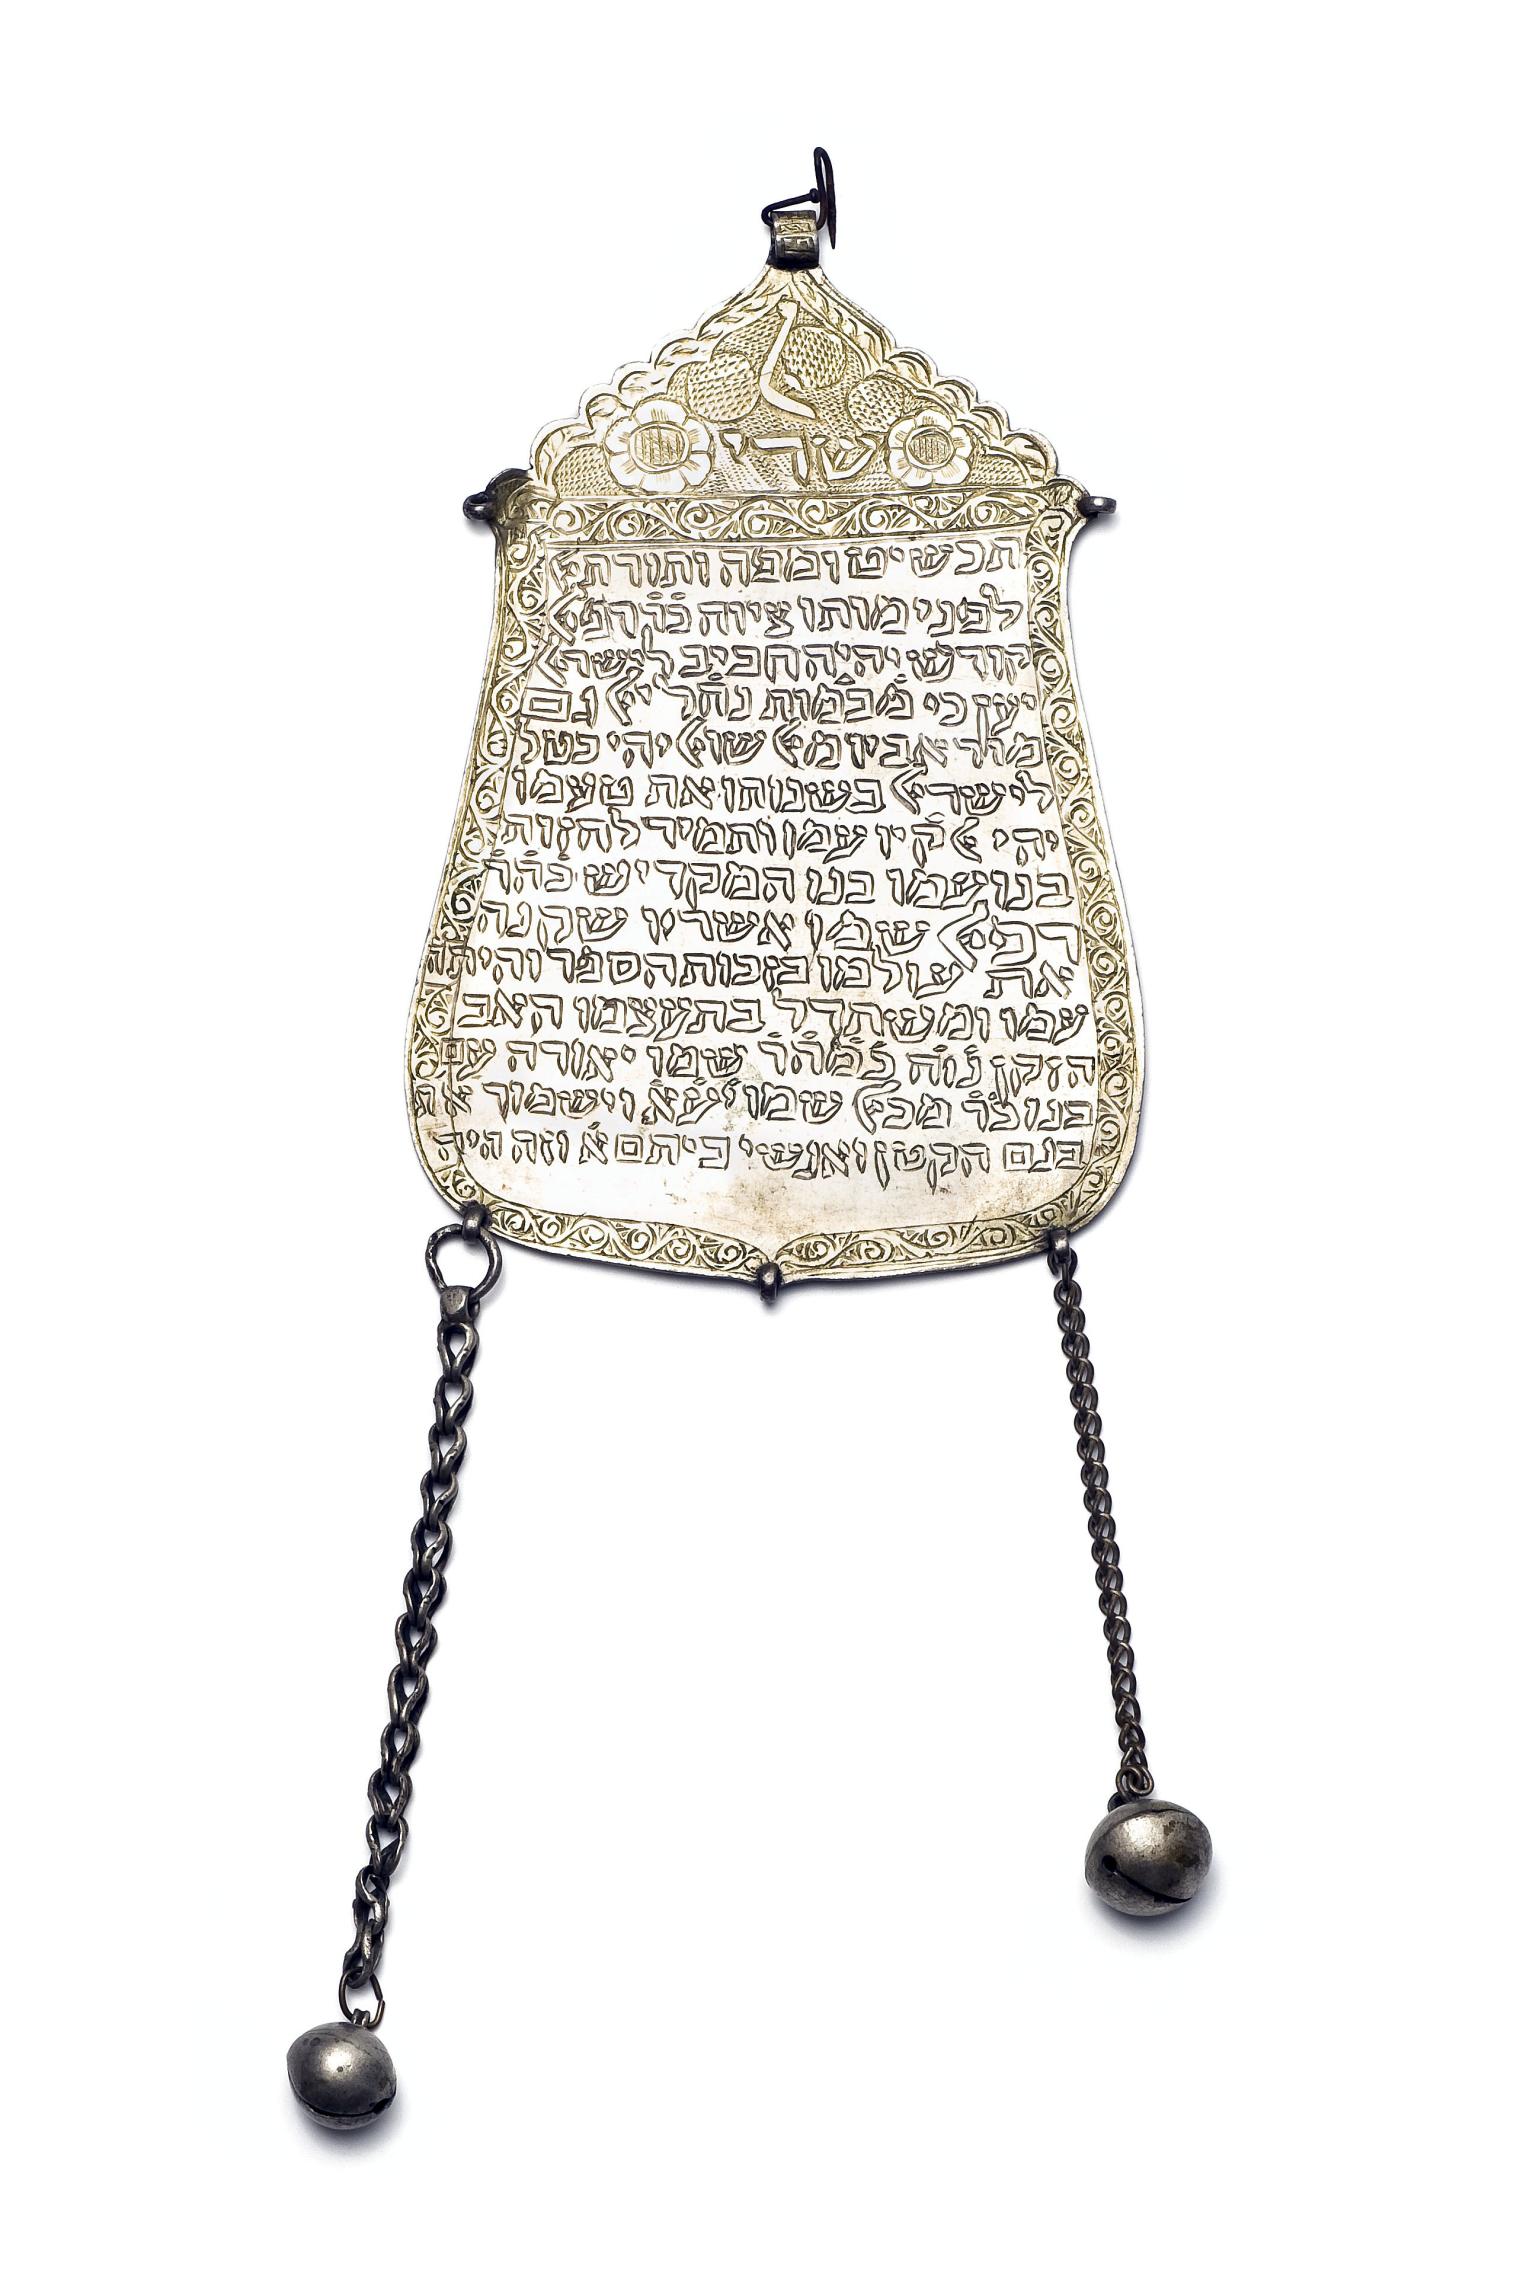 Plaque with Hebrew text and two chains hanging from the bottom.